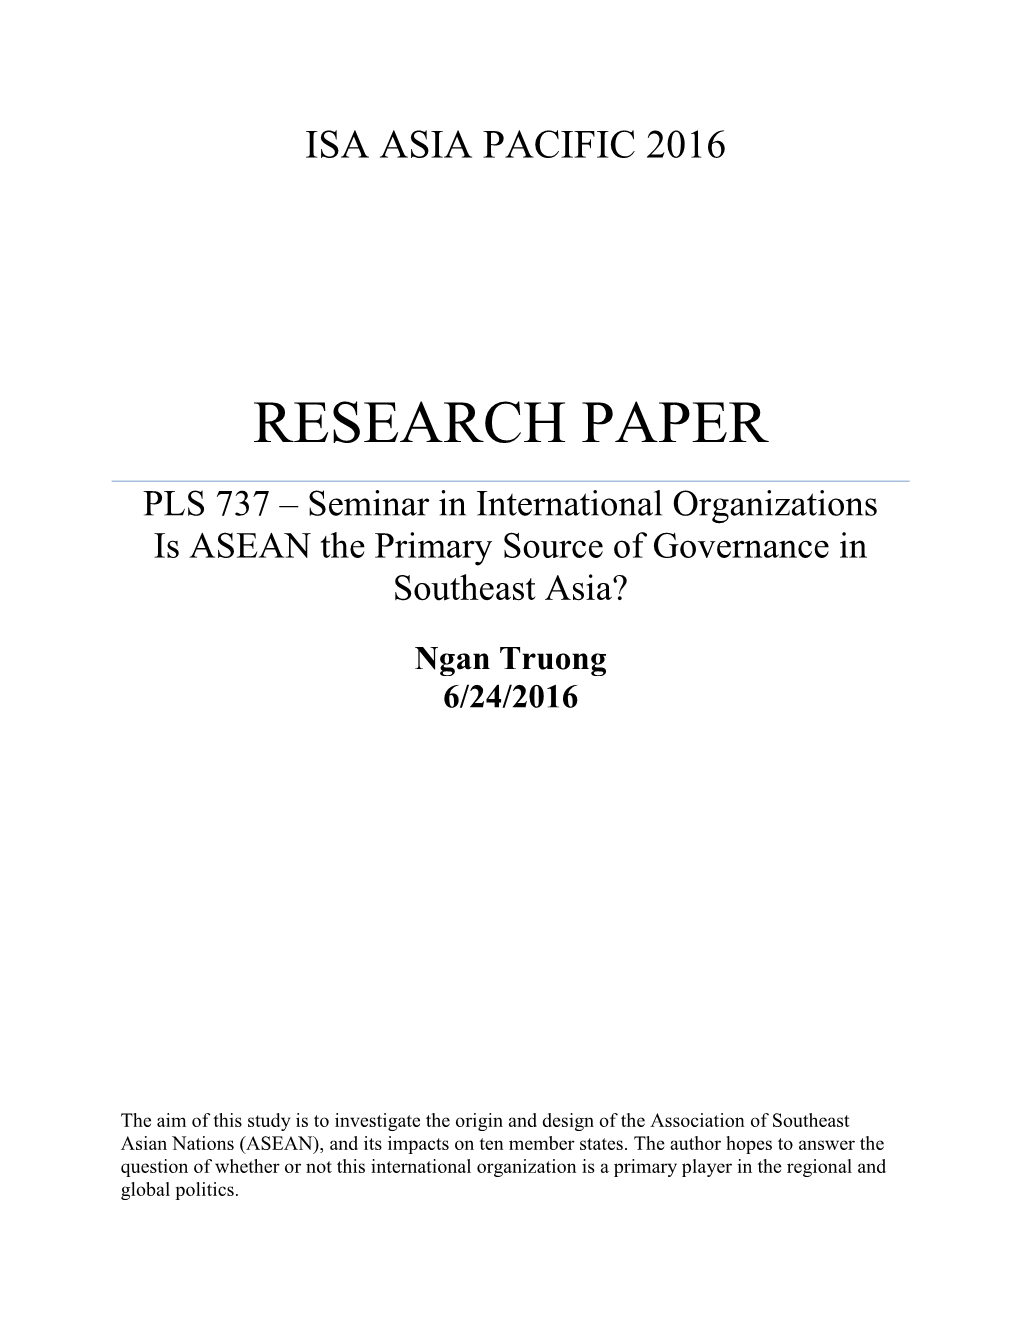 RESEARCH PAPER PLS 737 – Seminar in International Organizations Is ASEAN the Primary Source of Governance in Southeast Asia?